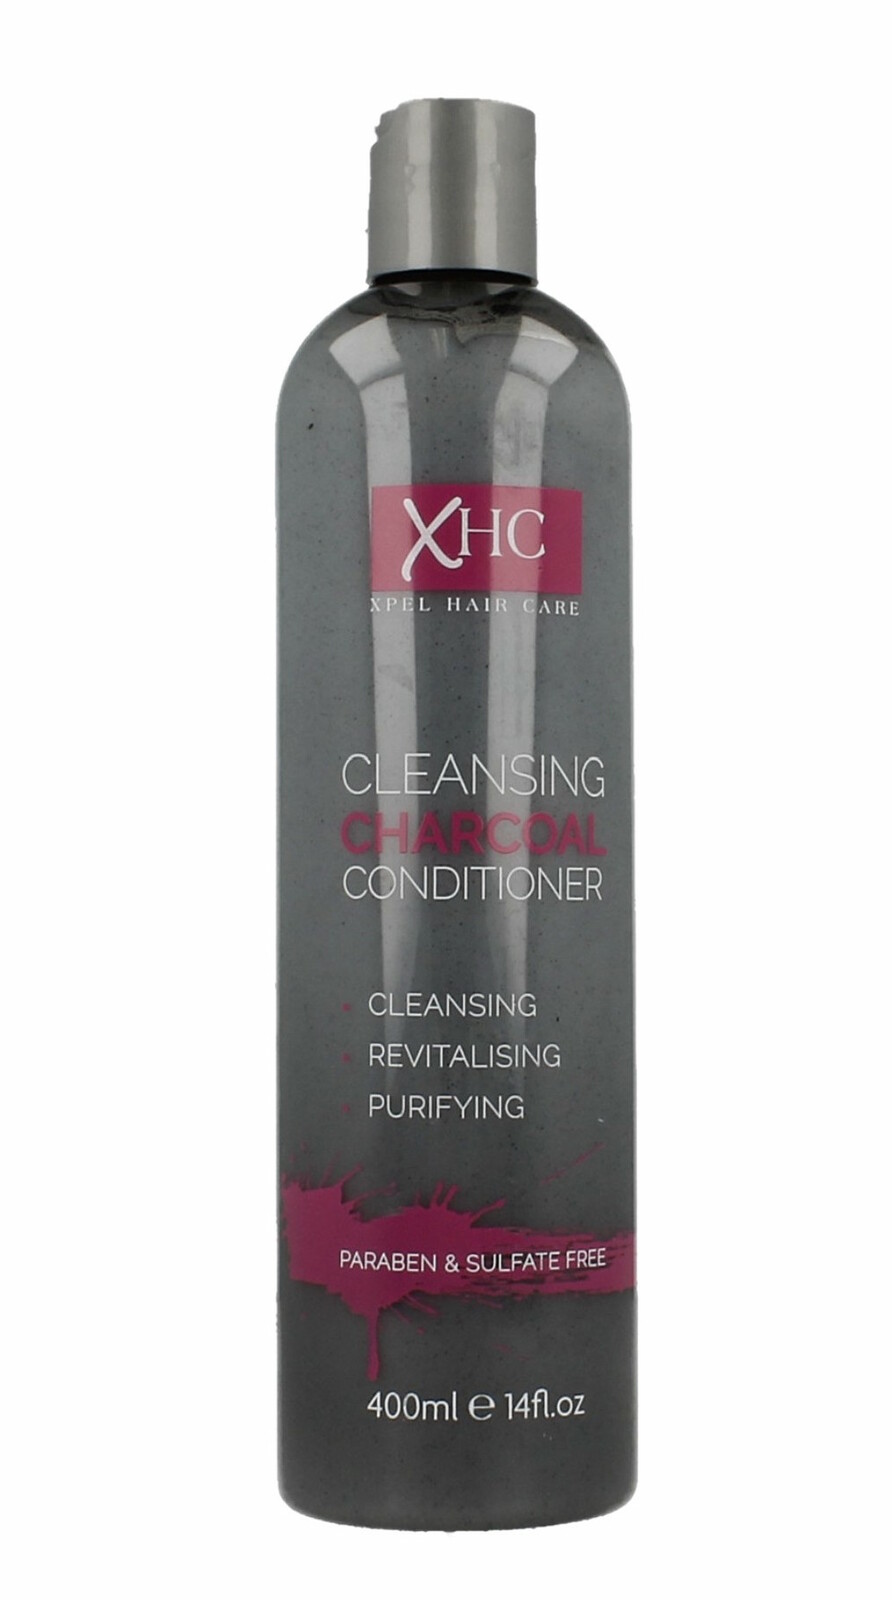 XHC Cleansing Charcoal Conditioner